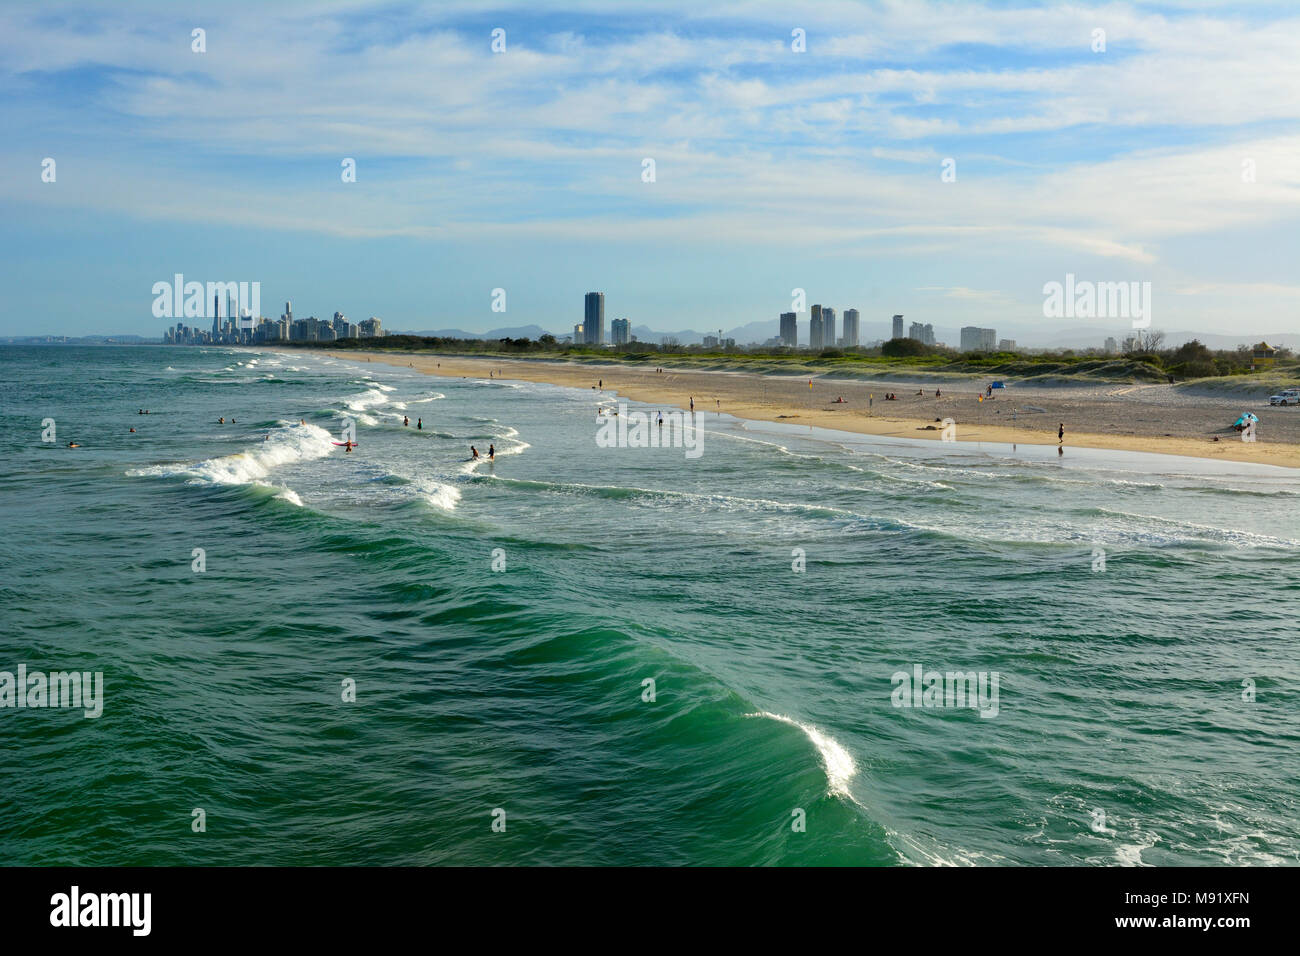 Beach at the Spit, with people and skyscrapers of Surfers Paradise in the distance. Stock Photo